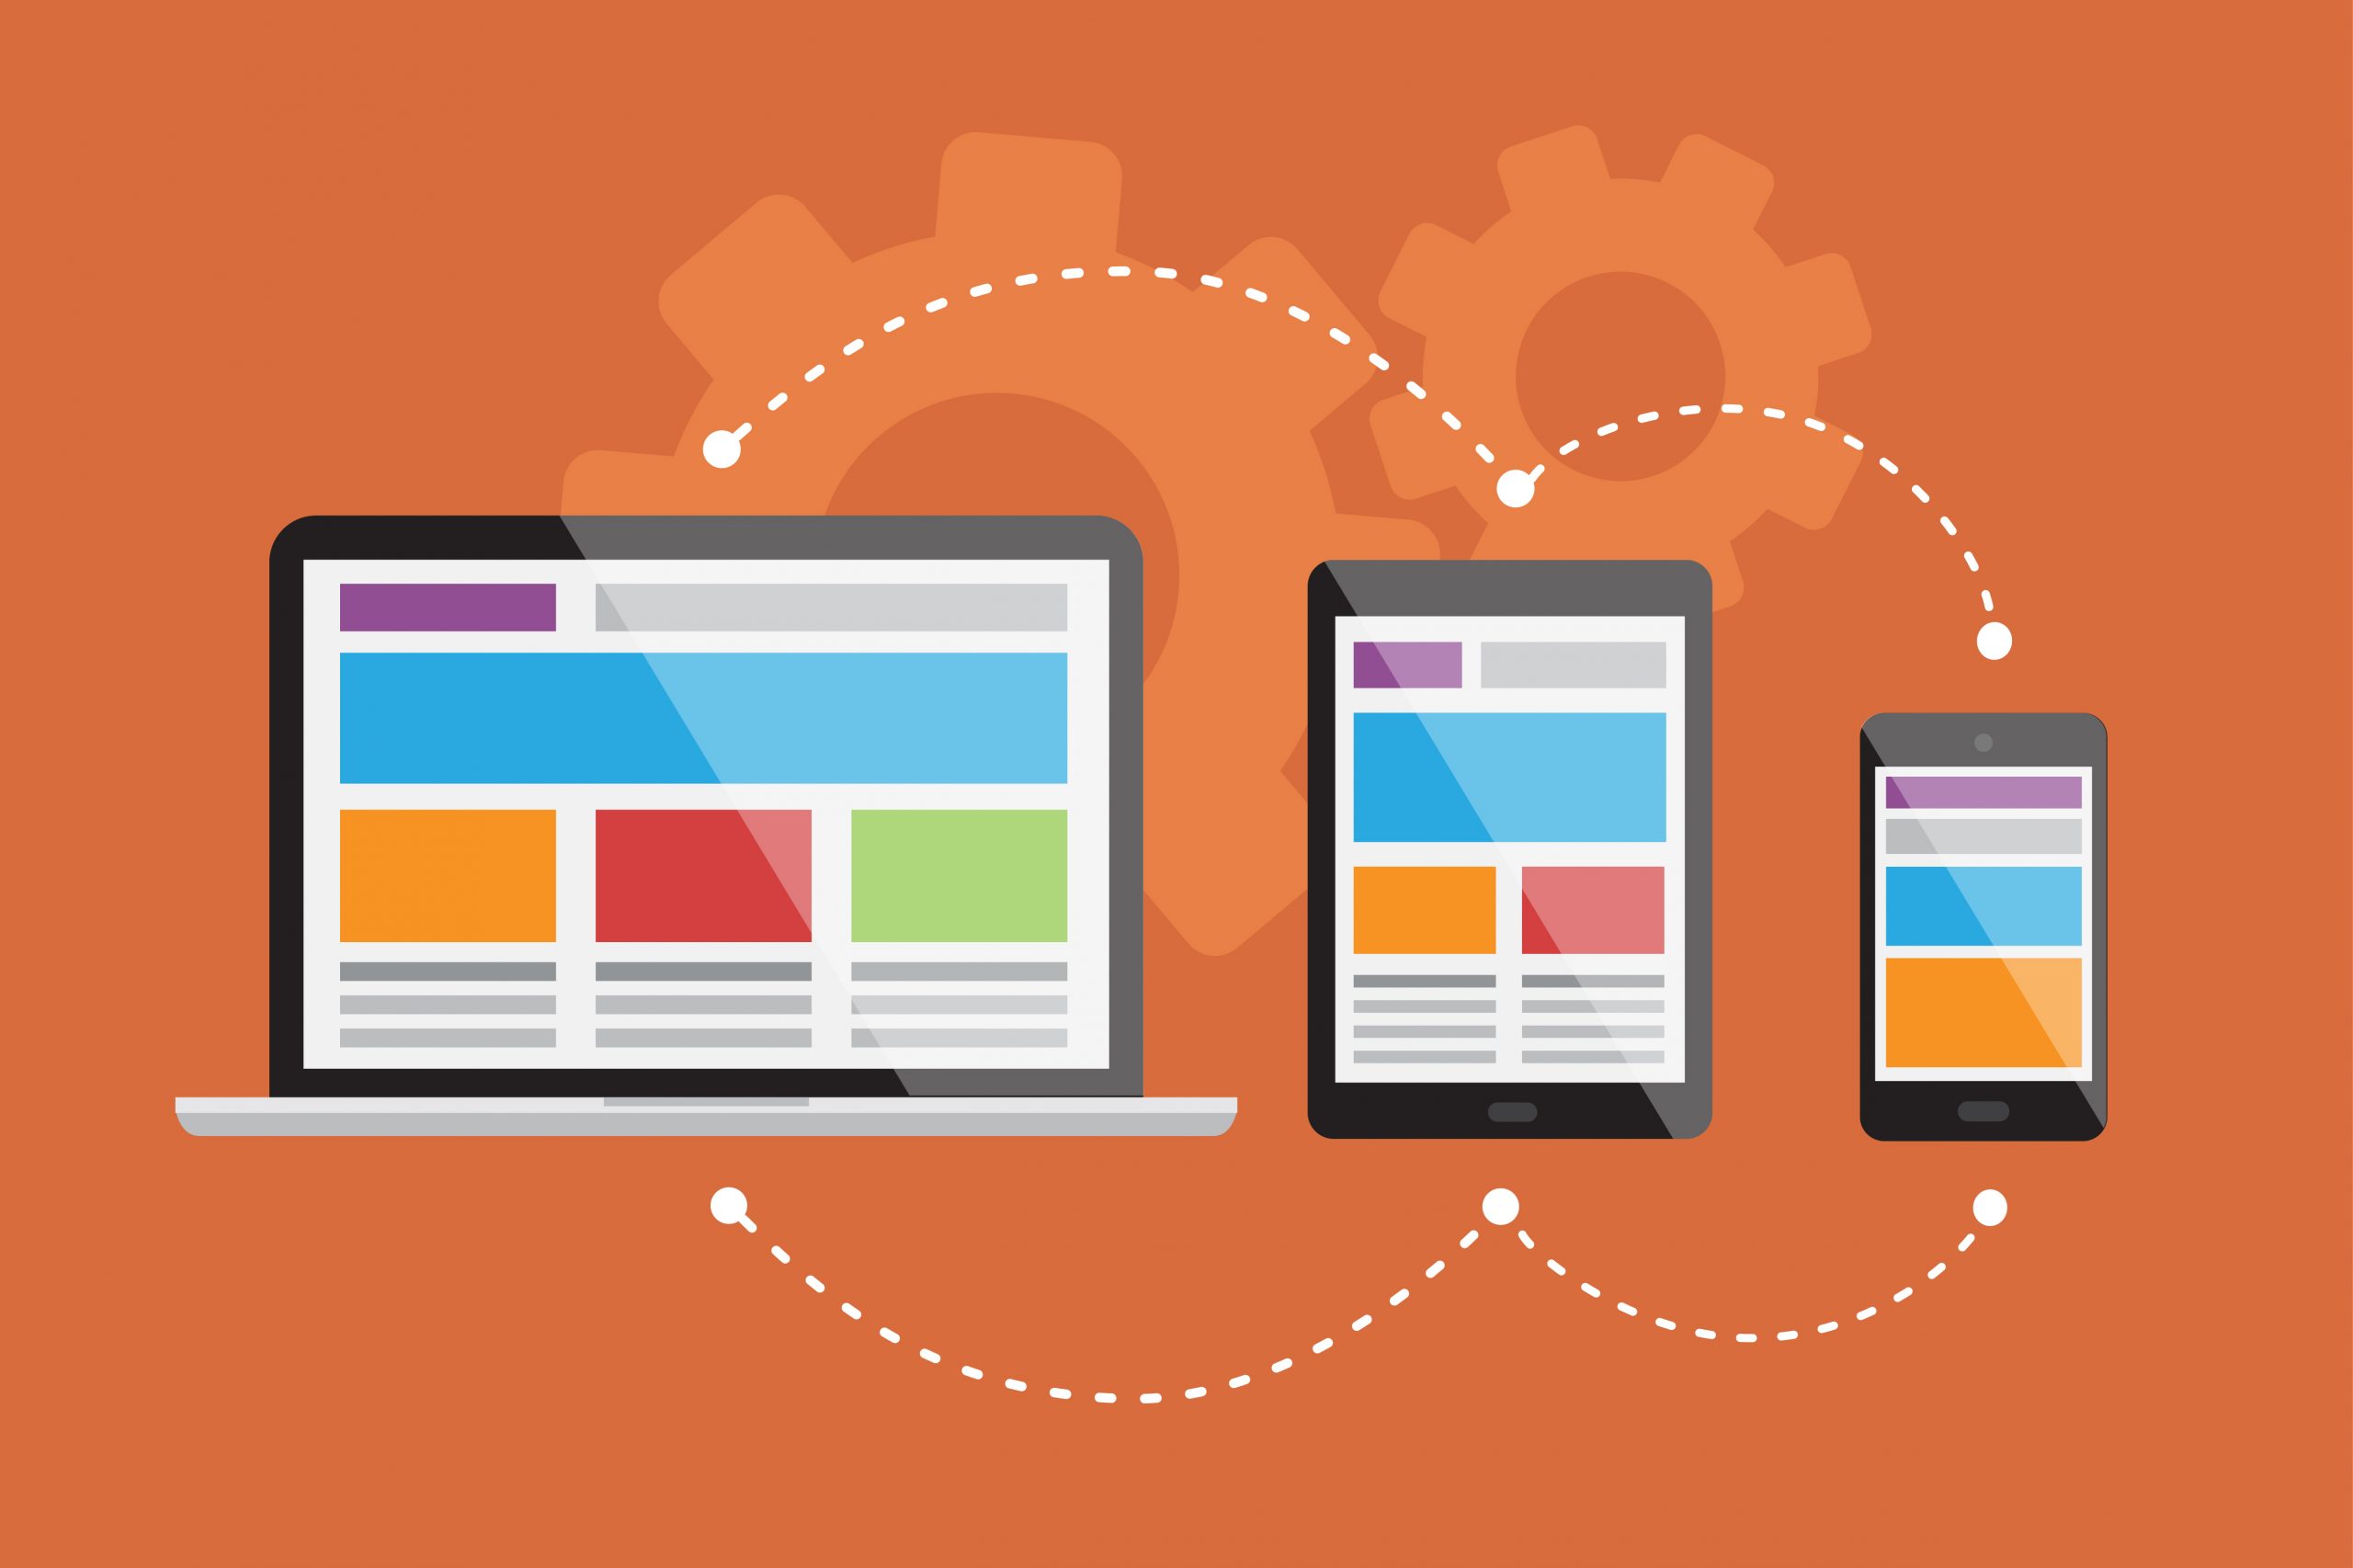 What is Responsive Web Design?